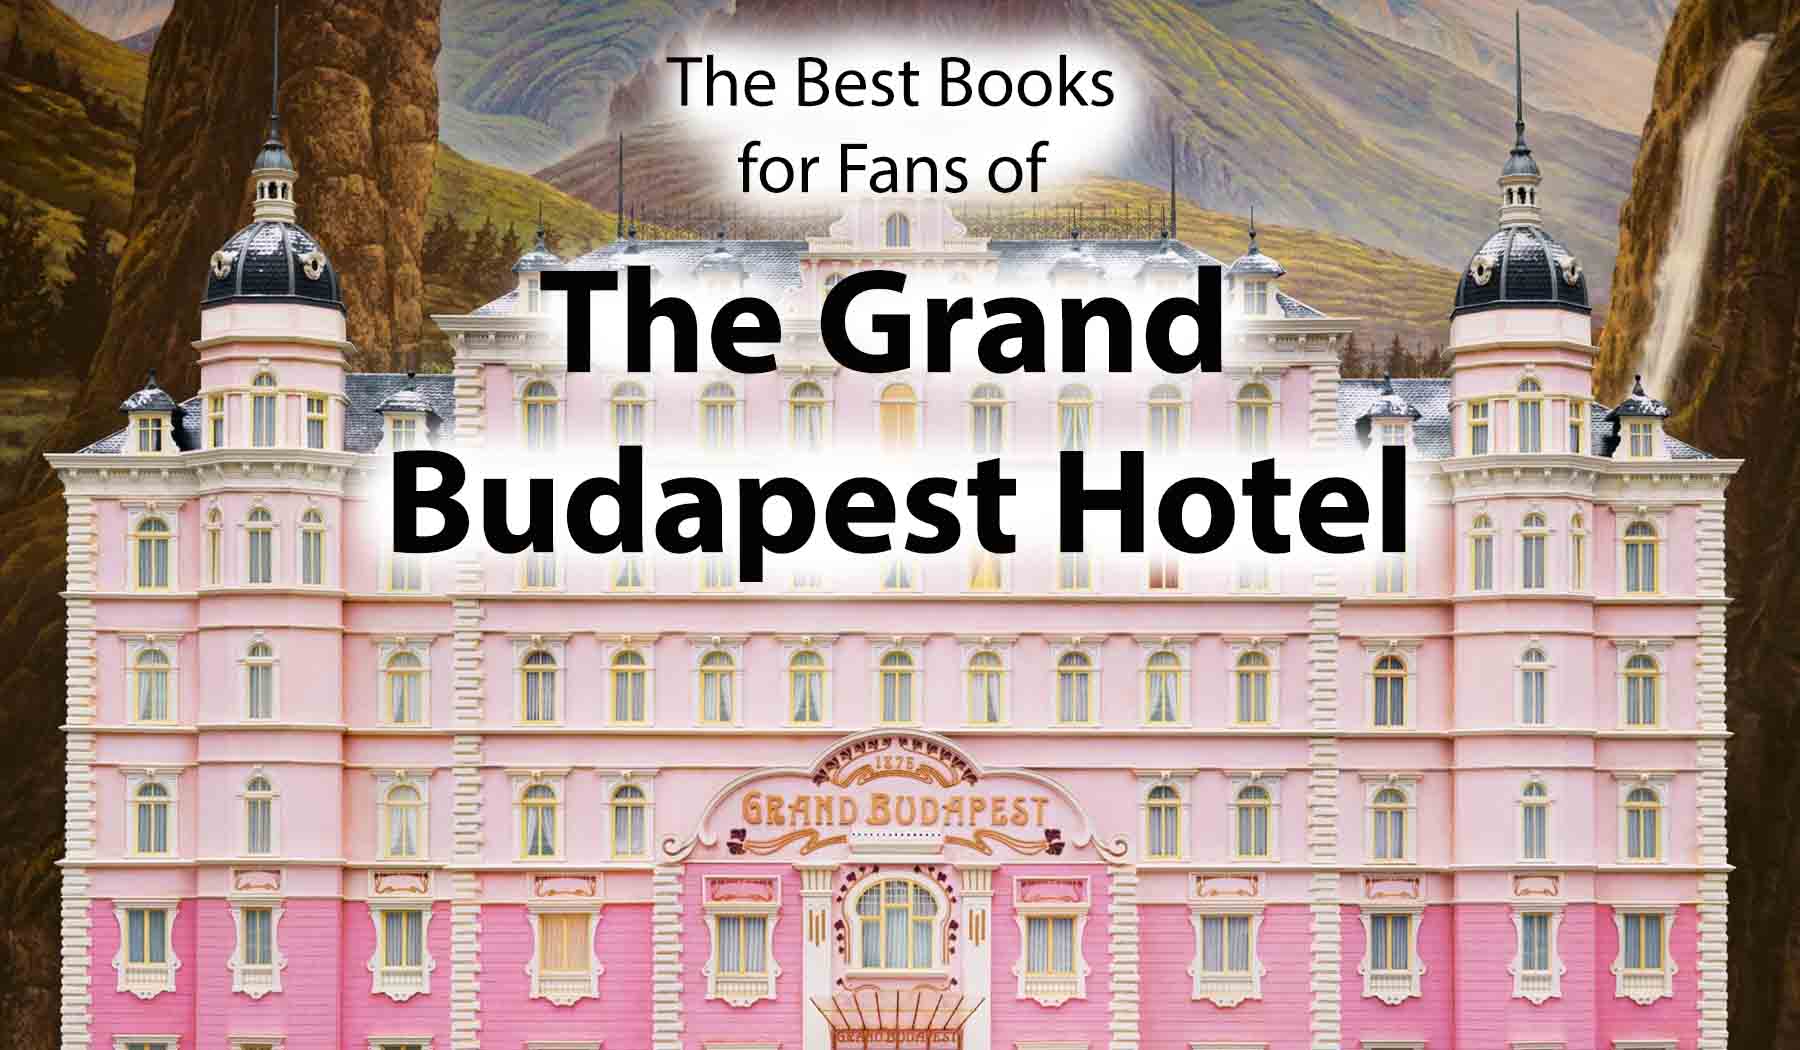 The Best Books for Fans of The Grand Budapest Hotel